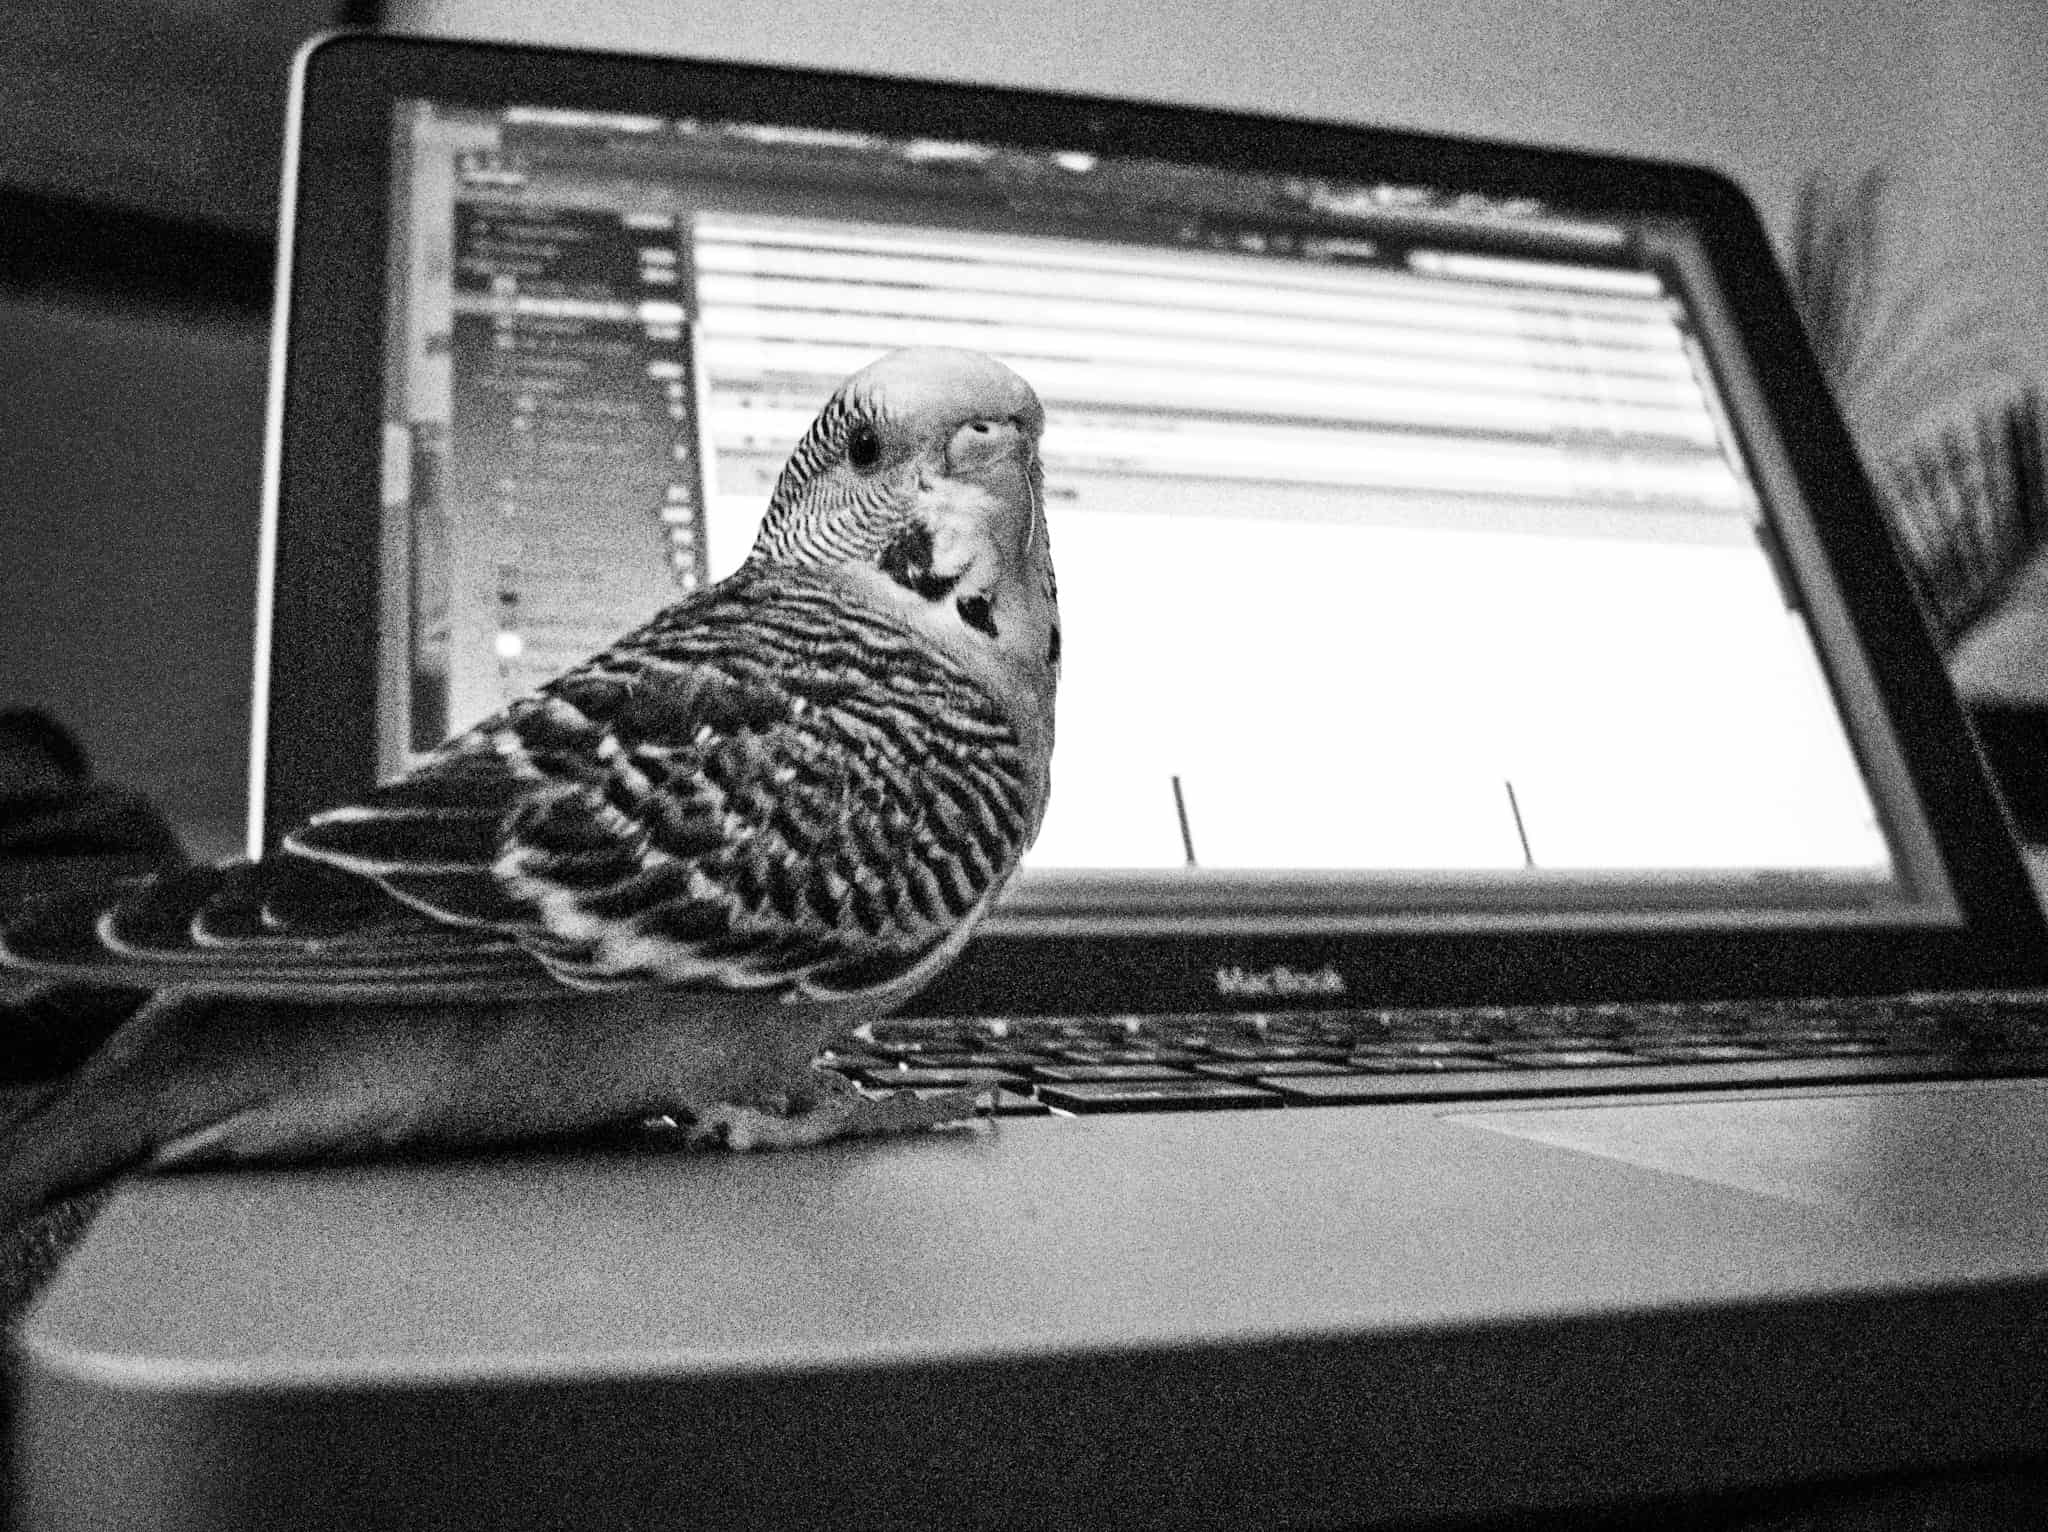 Even this little birdy is deleting his tweets.